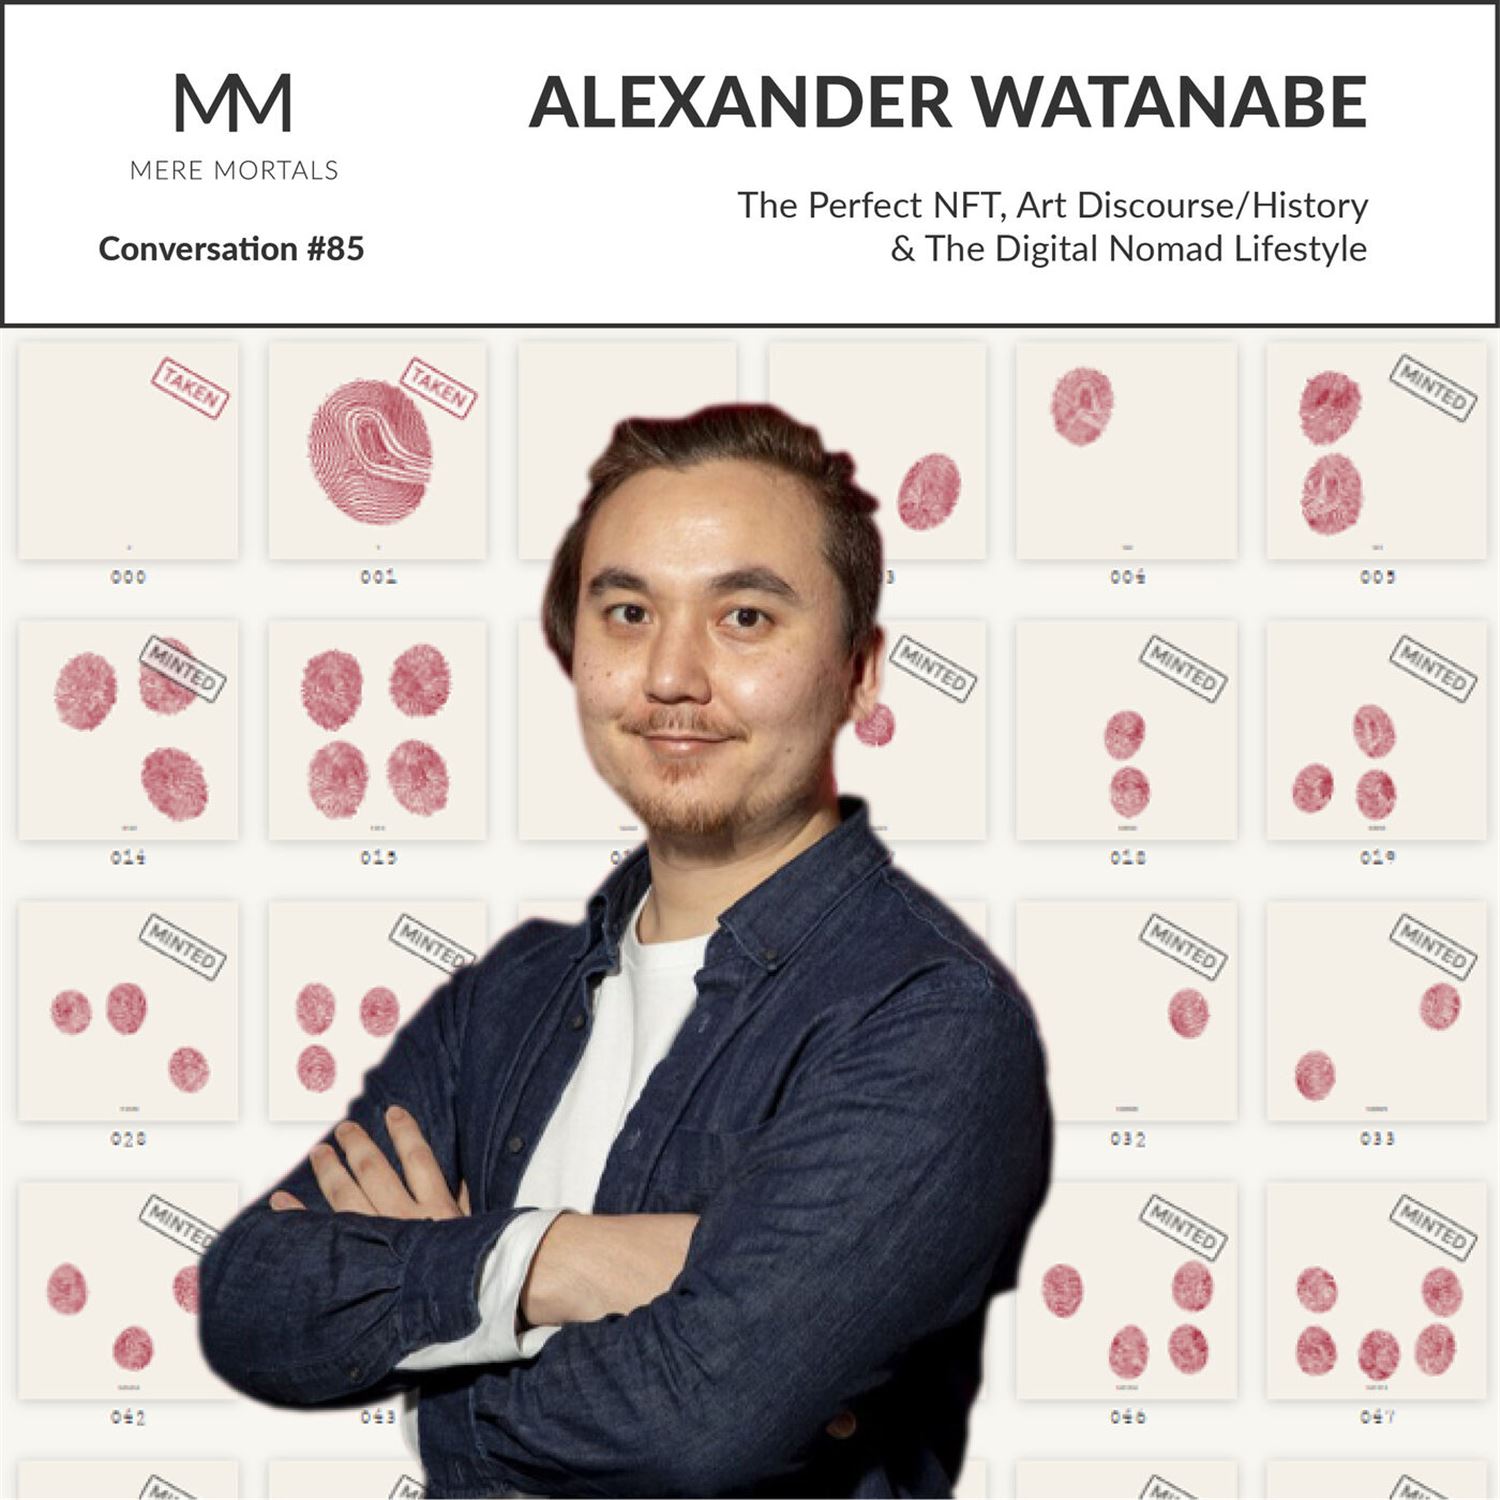 ALEXANDER WATANABE | The Perfect NFT, Art Discourse/History & The Digital Nomad Lifestyle